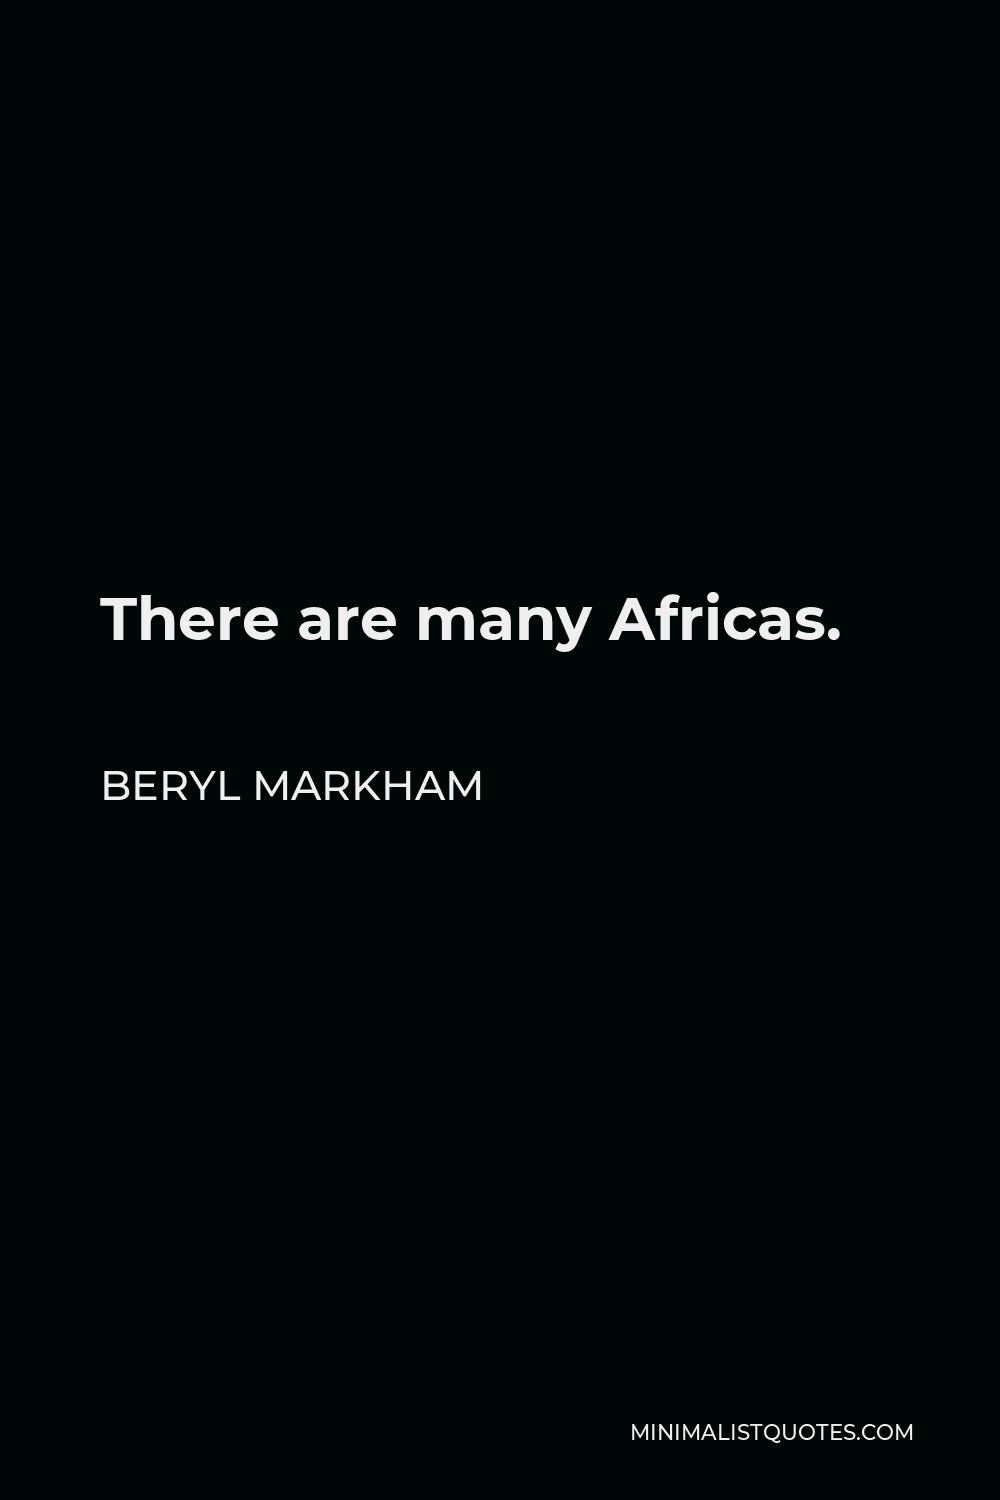 Beryl Markham Quote - There are many Africas.